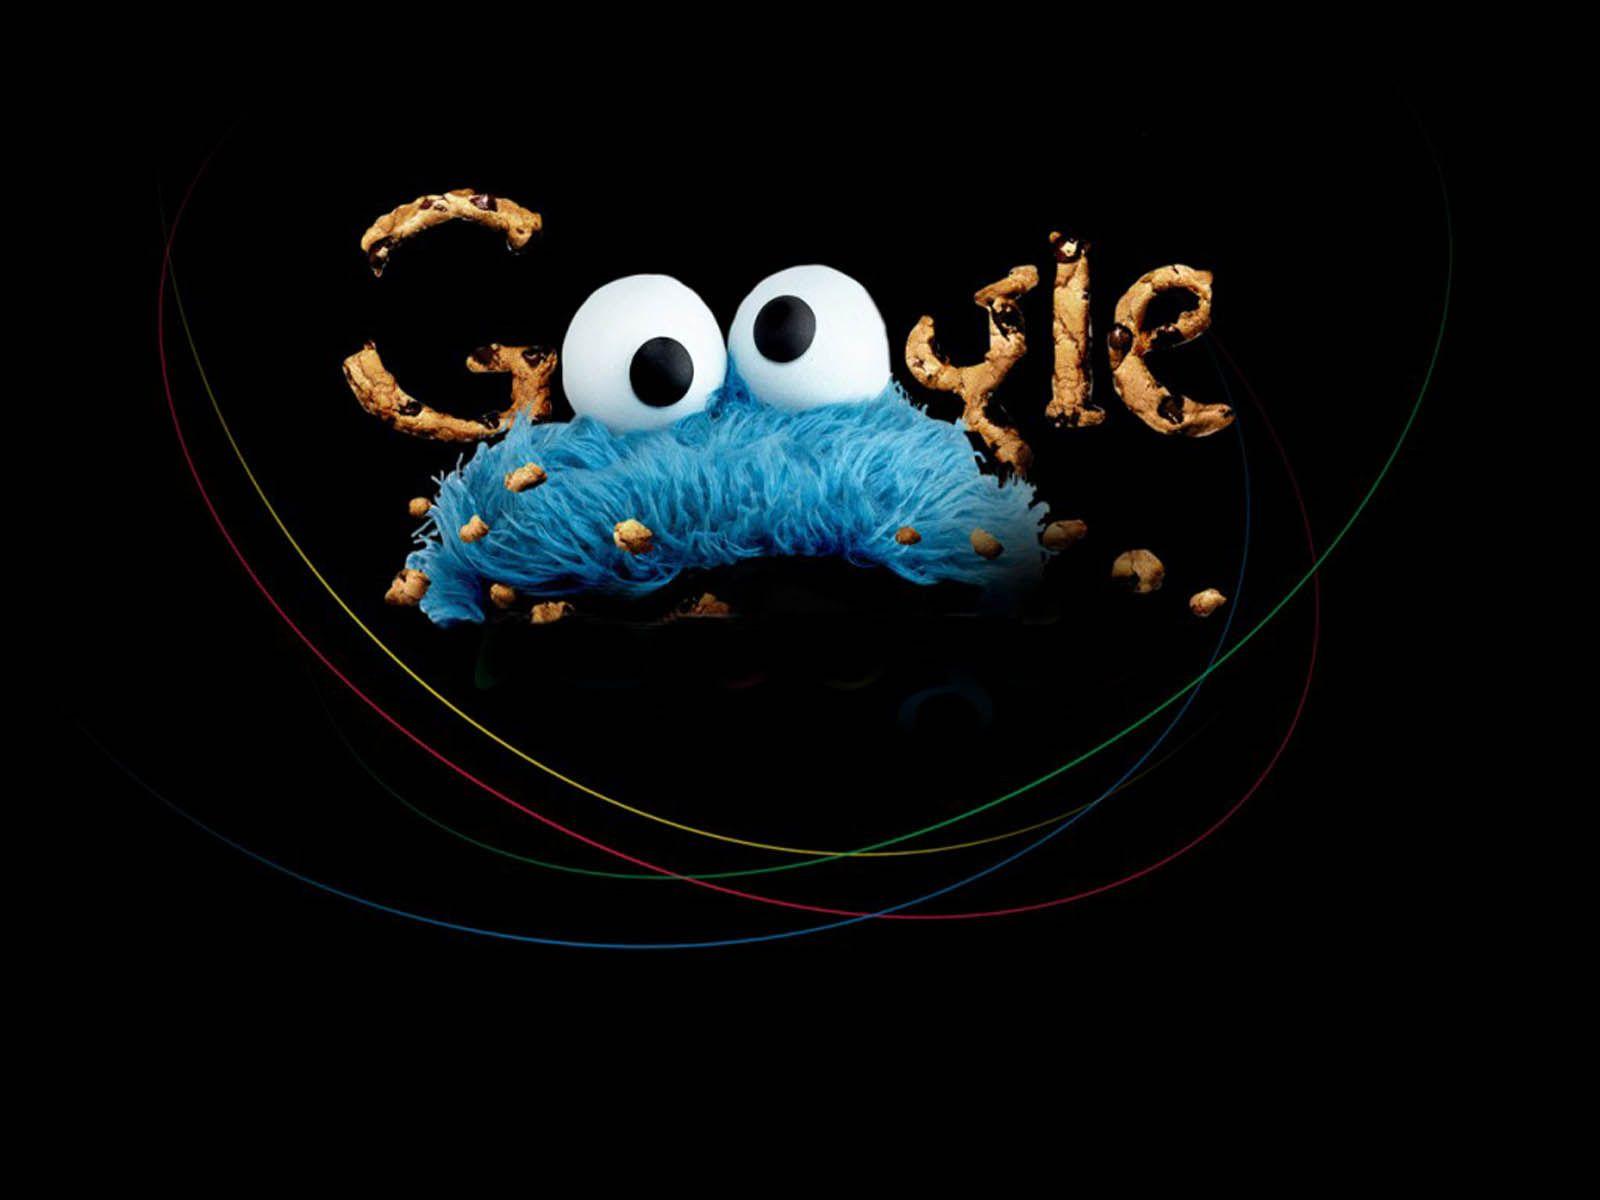 Free Google Background Wallpaper and Background